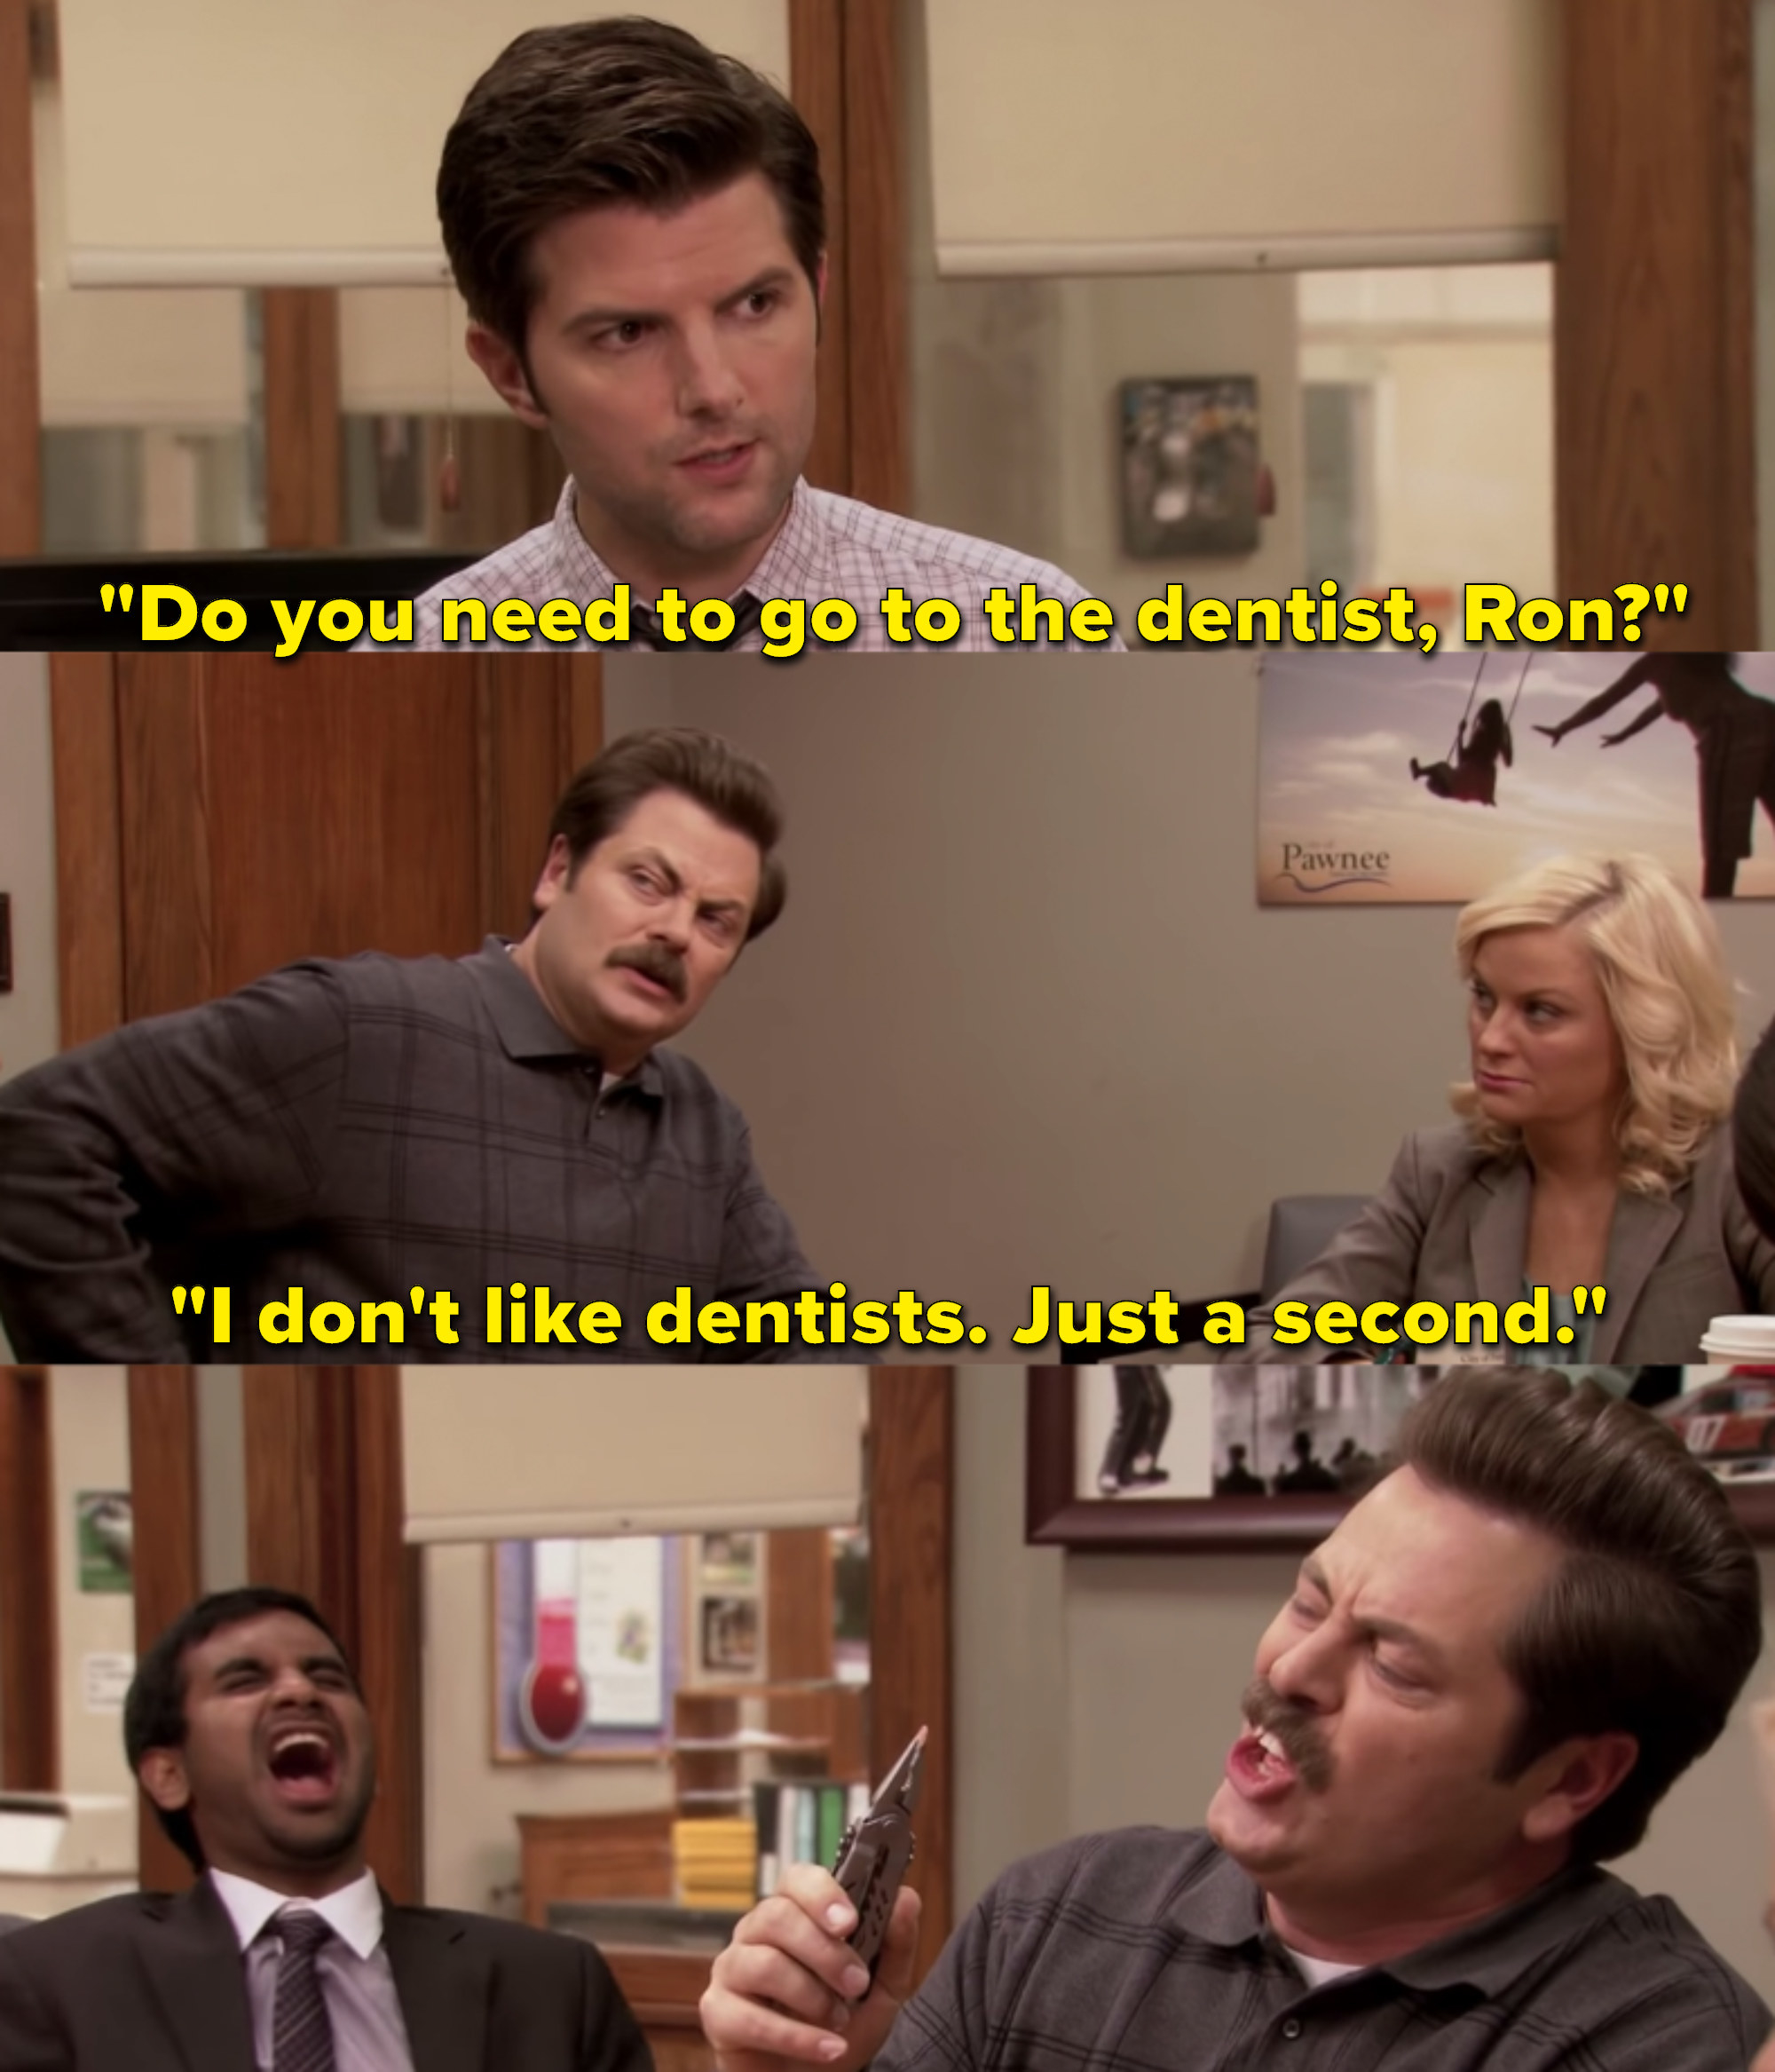 Adam Scott as Ben Wyatt, Aziz Ansari as Tom Haverford, and Nick Offerman as Ron Swanson in the show &quot;Parks and Recreation.&quot;